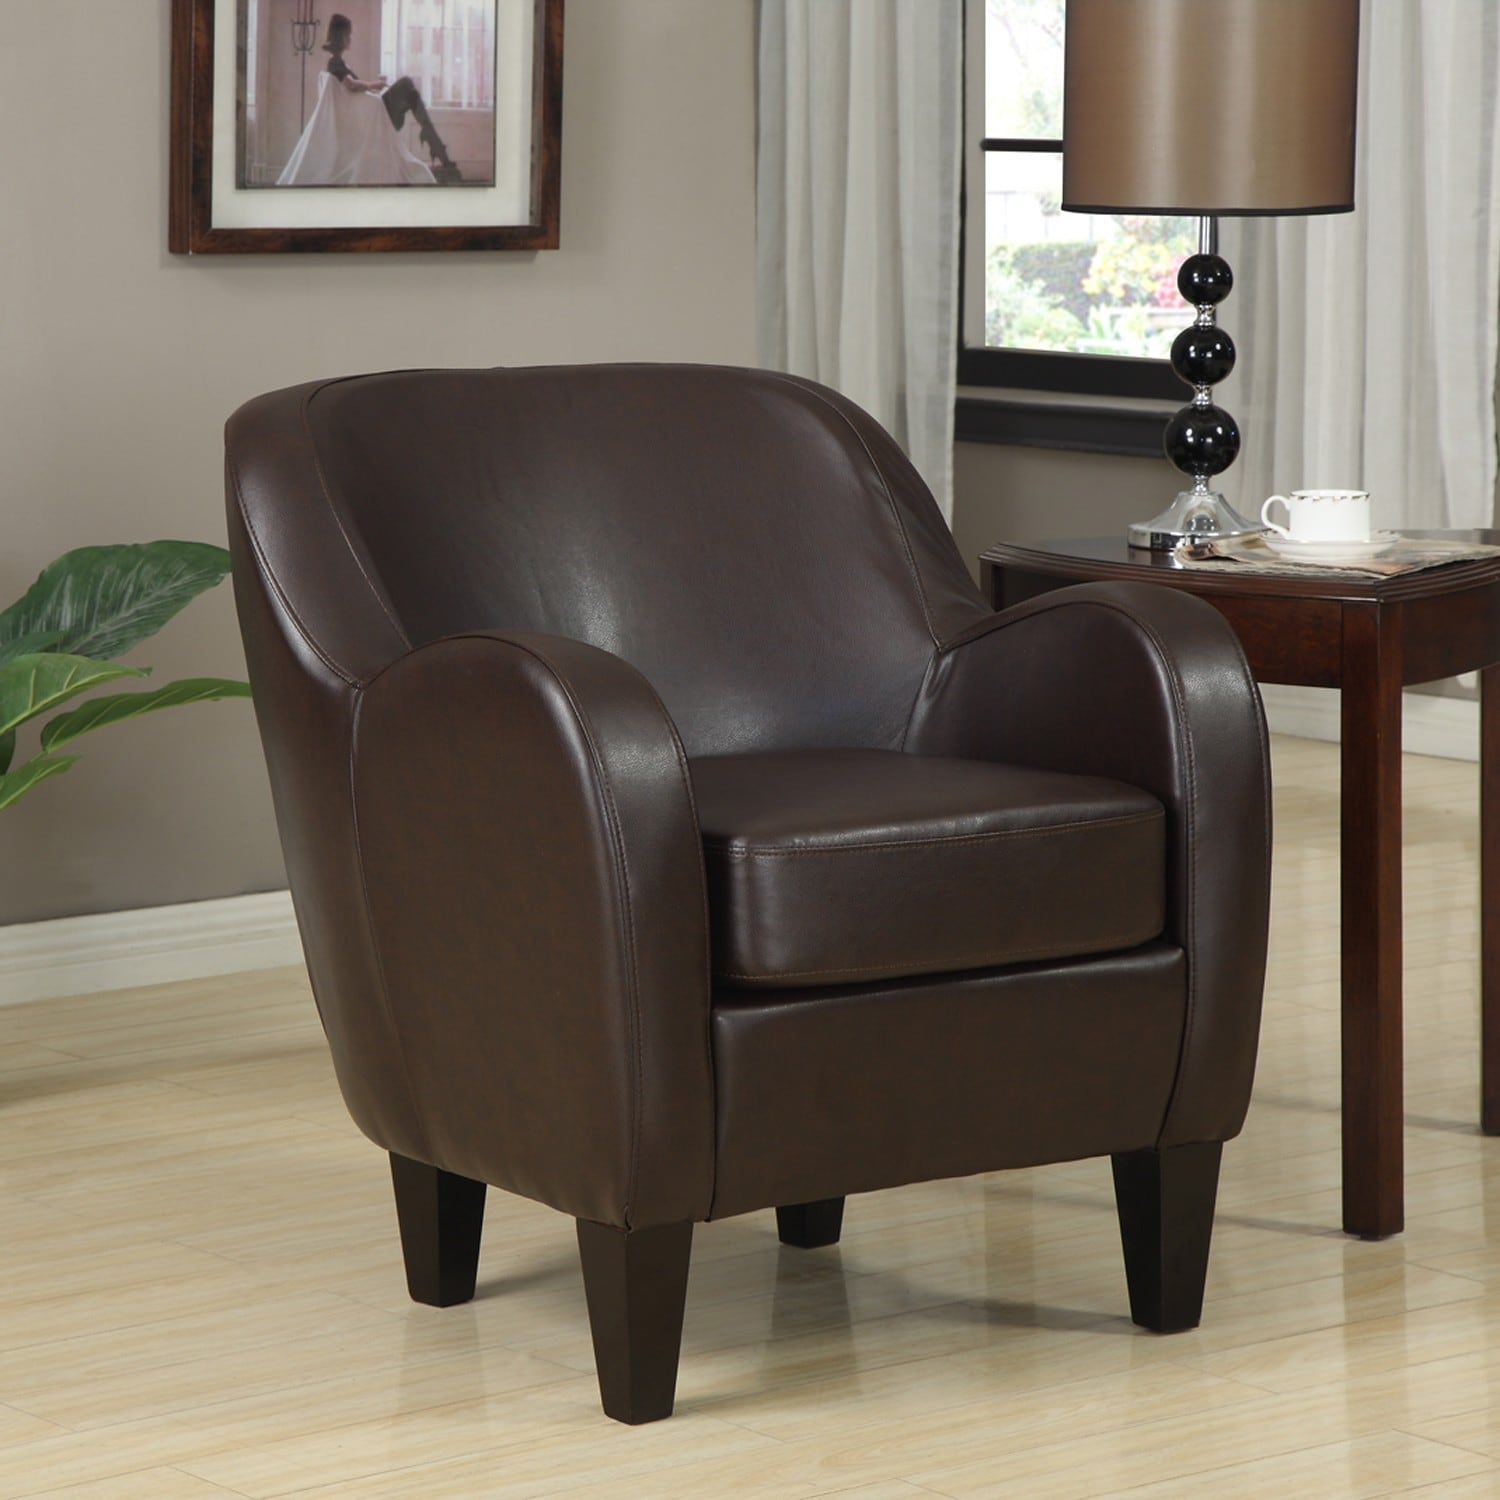 Bedford Bonded Leather Chair - Overstock™ Shopping - Great Deals on Living Room Chairs